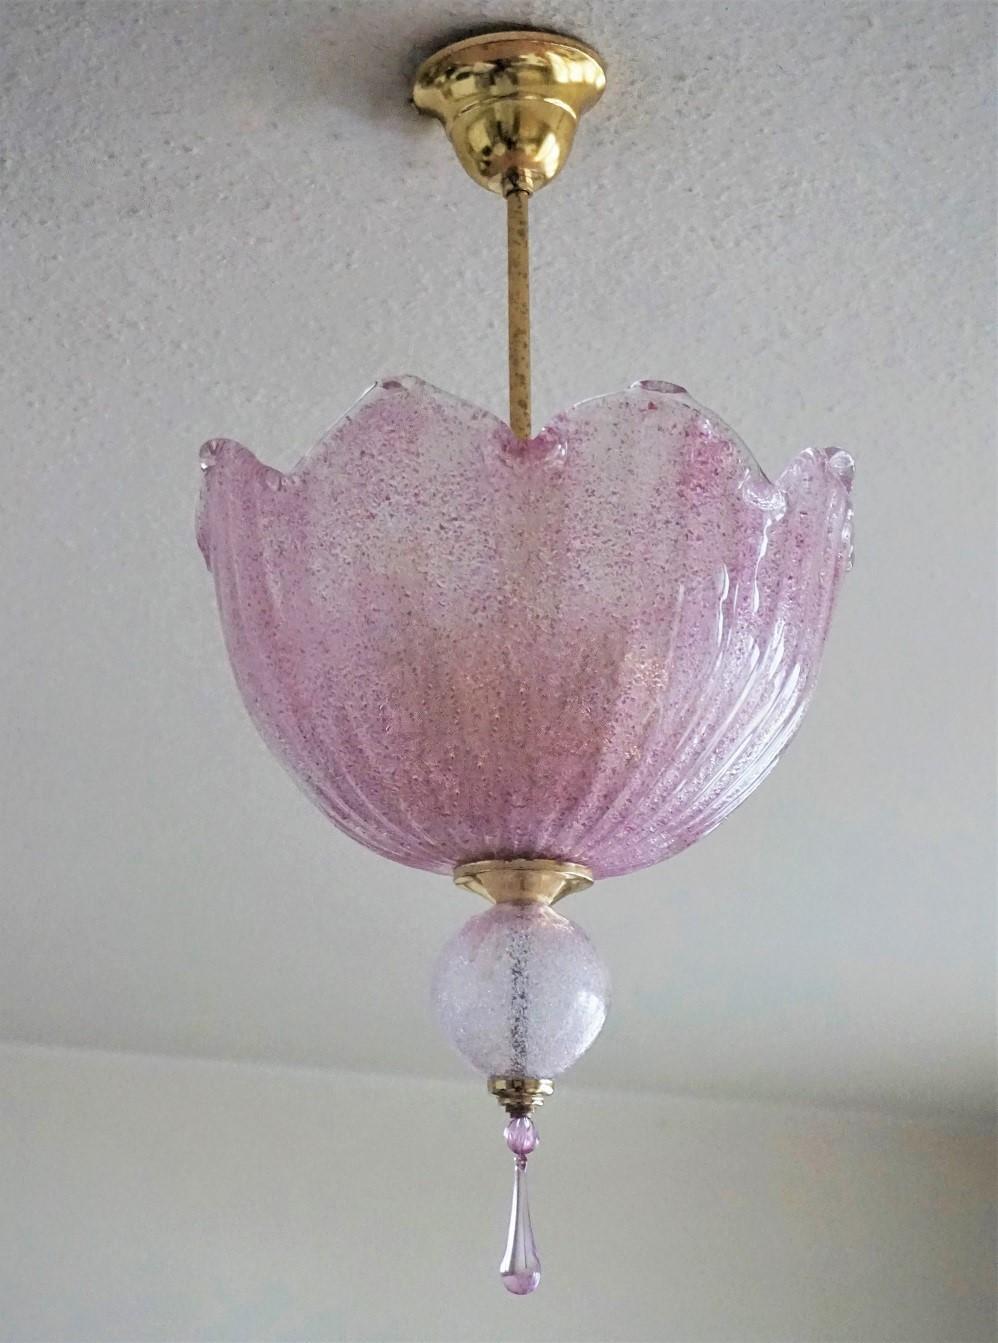 A lovely Murano pink glass two-light chandelier or lantern gilt brass mounted, Italy, 1960s. It takes two E27 light bulbs.
Measures:
Height 23.25